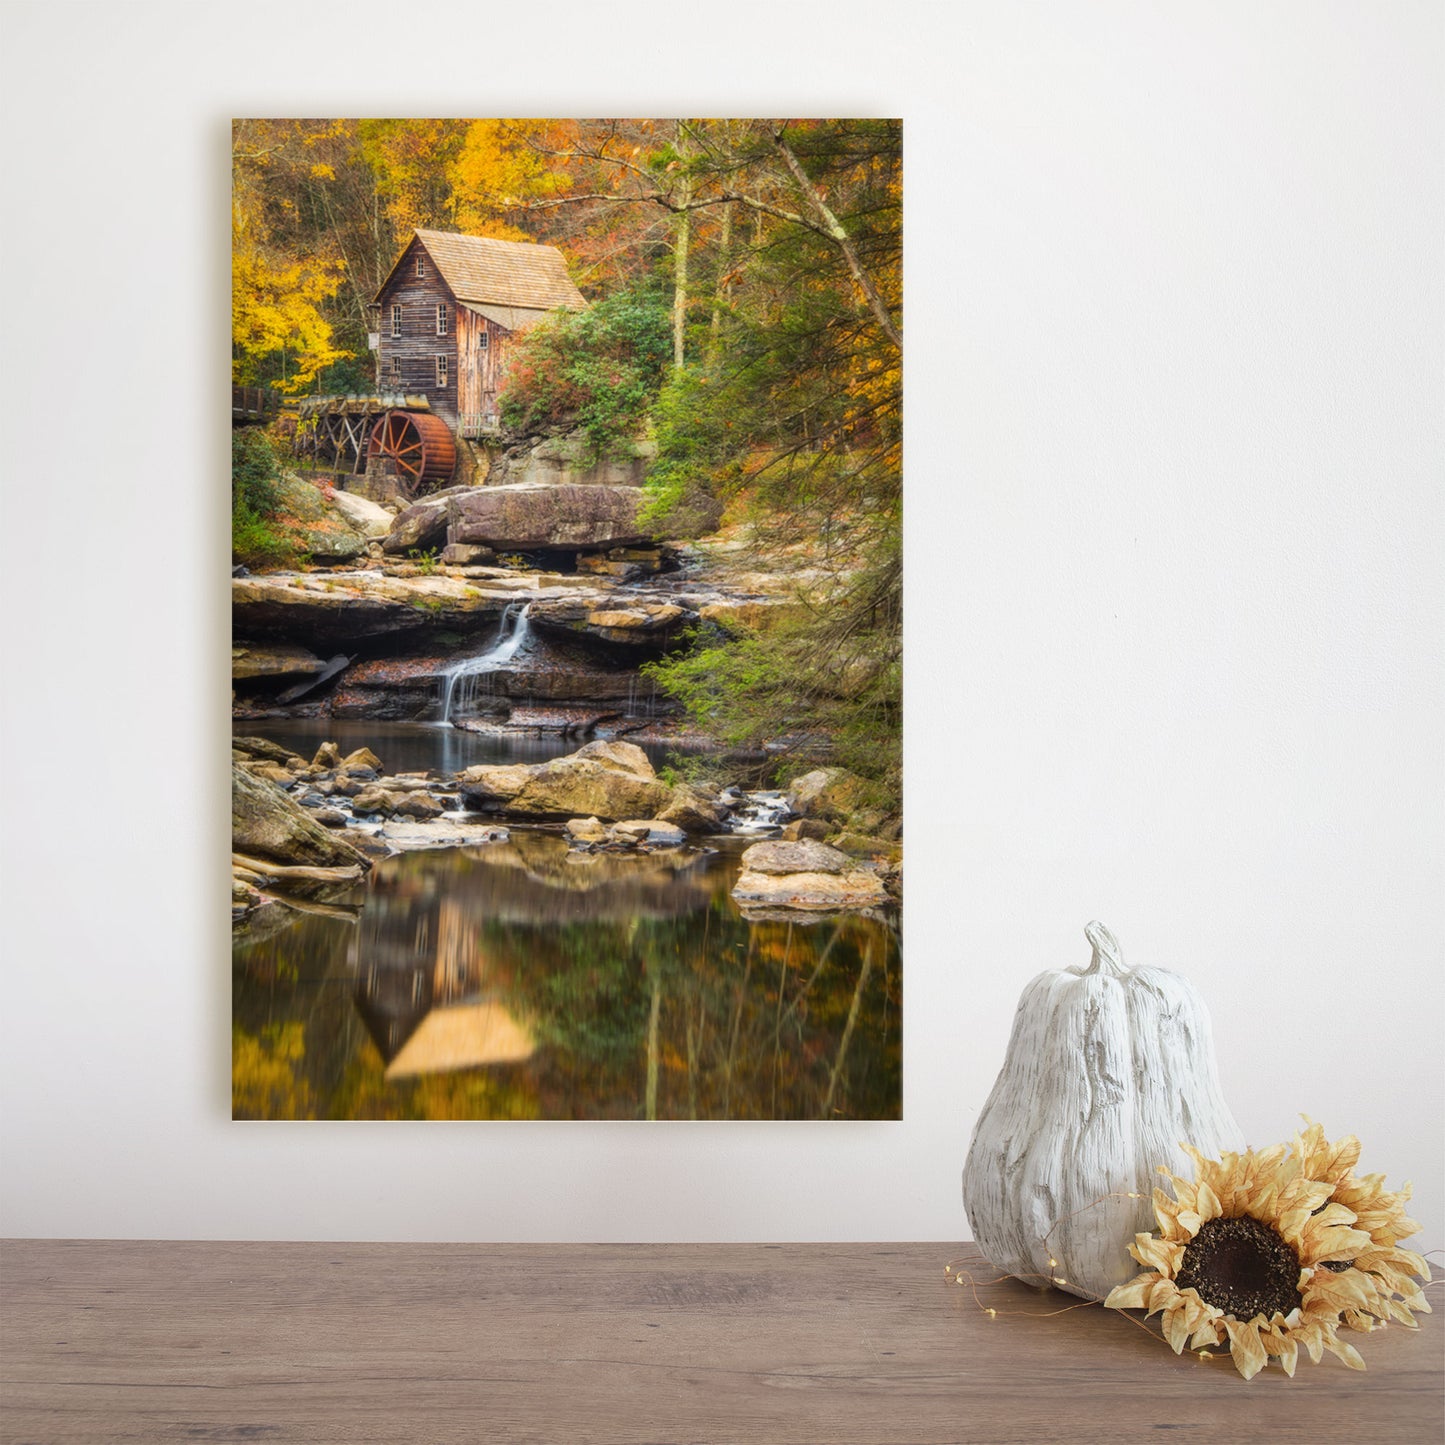 Babcock State Park Glade Creek Grist Mill canvas art featuring a picturesque mill and breathtaking waterfall.